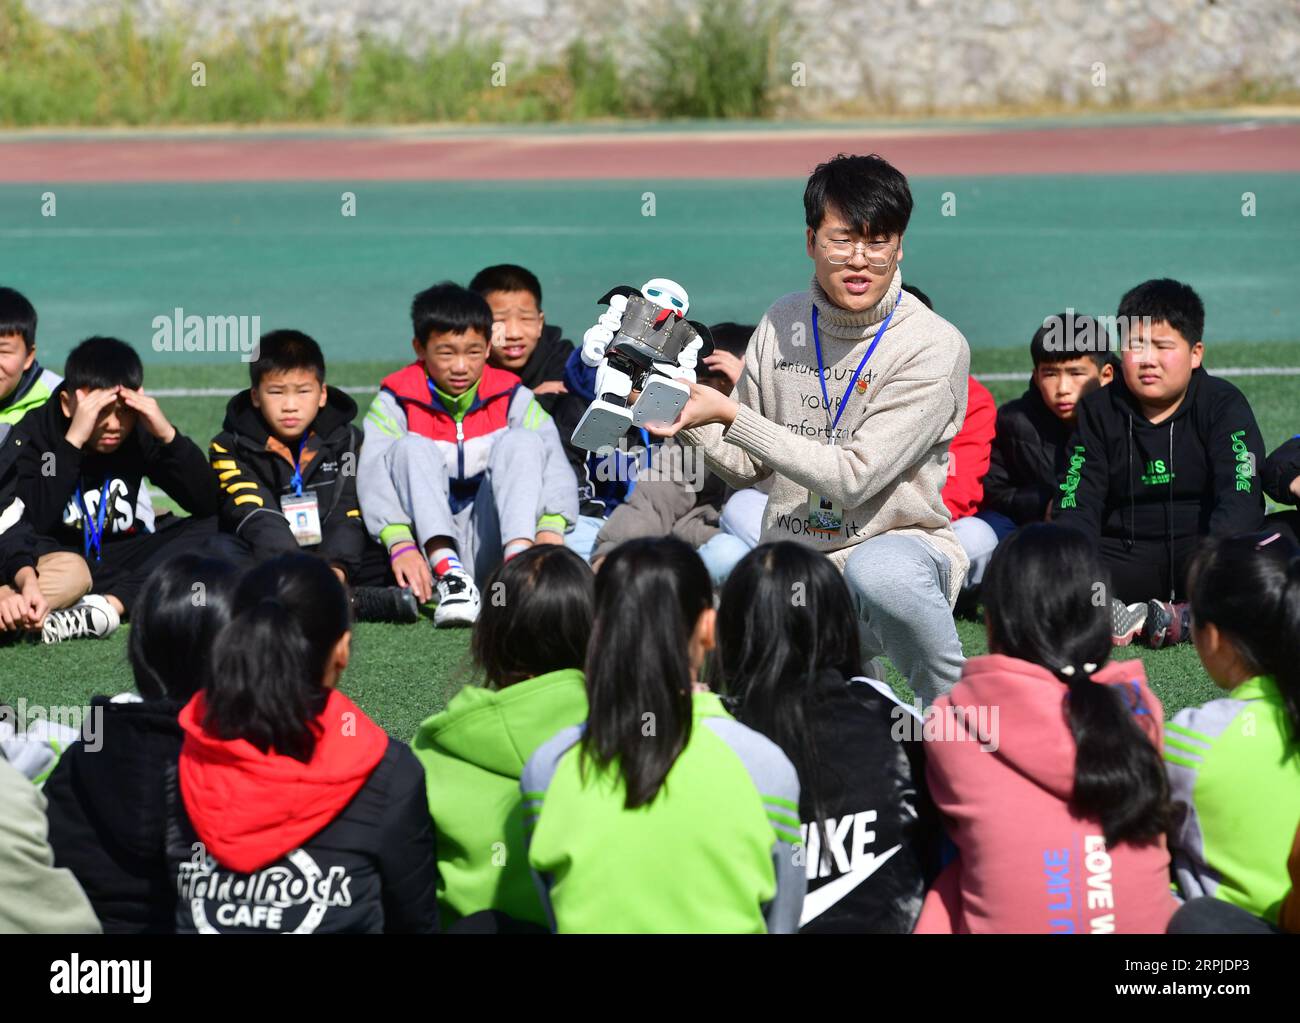 191206 -- RONGSHUI, Dec. 6, 2019 -- Tan Botian, a postgraduate student of Northwestern Polytechnical University NPU who volunteers here as a head teacher, gives a science and technology class to students at Siyuan Experimental School in Rongshui Miao Autonomous County, south China s Guangxi Zhuang Autonomous Region, Dec. 5, 2019. Rongshui is among the 20 deeply impoverished counties in south China s Guangxi. Off its 115 poor villages, 73 are deeply impoverished. Since 2015, the NPU has launched educational assistance to the county where education level is low. Relying on its S&T as well as edu Stock Photo